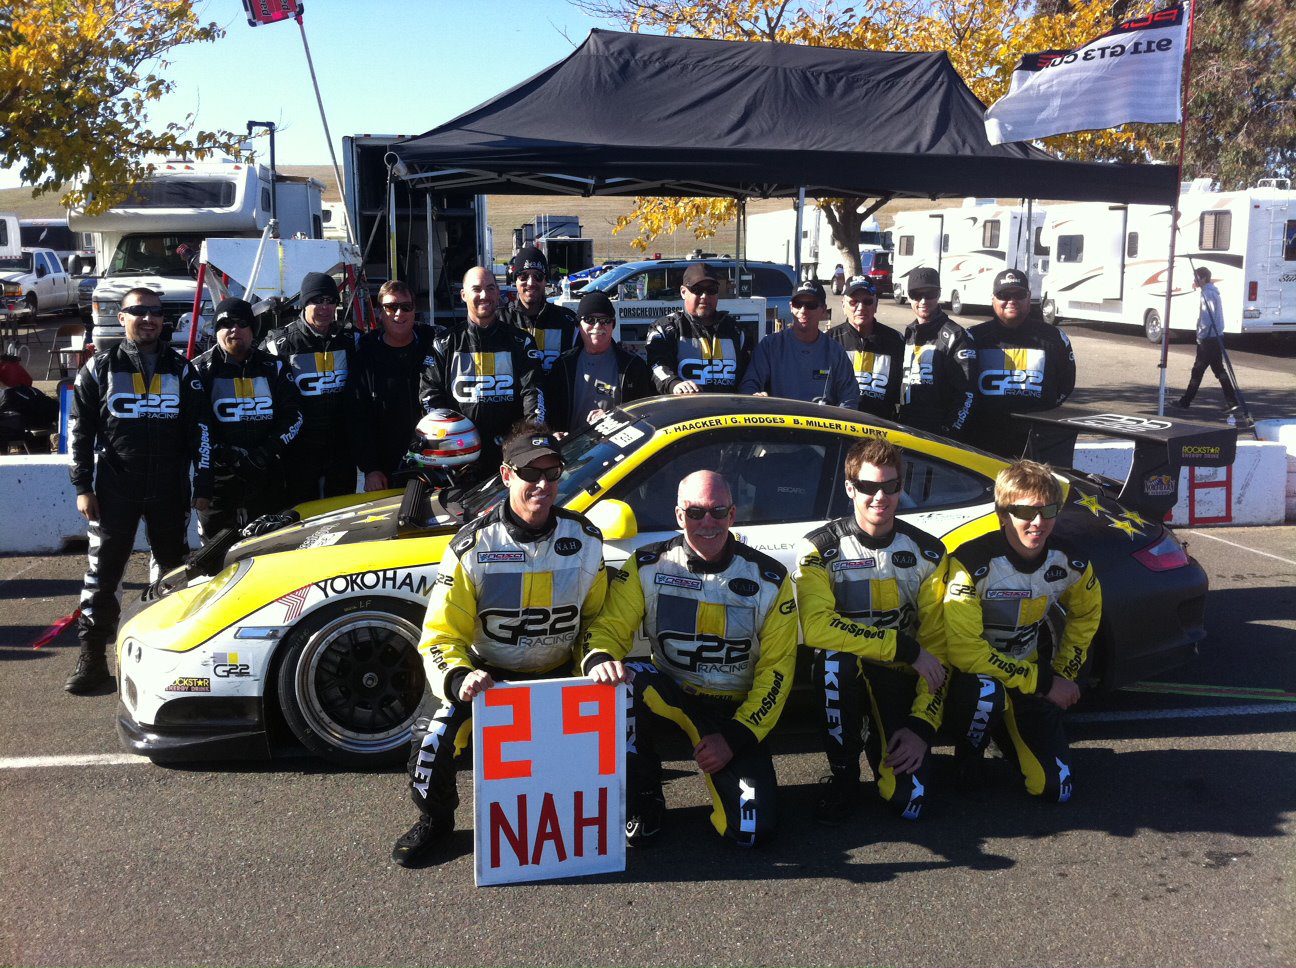 2nd Place Team At Thunderhill from OC